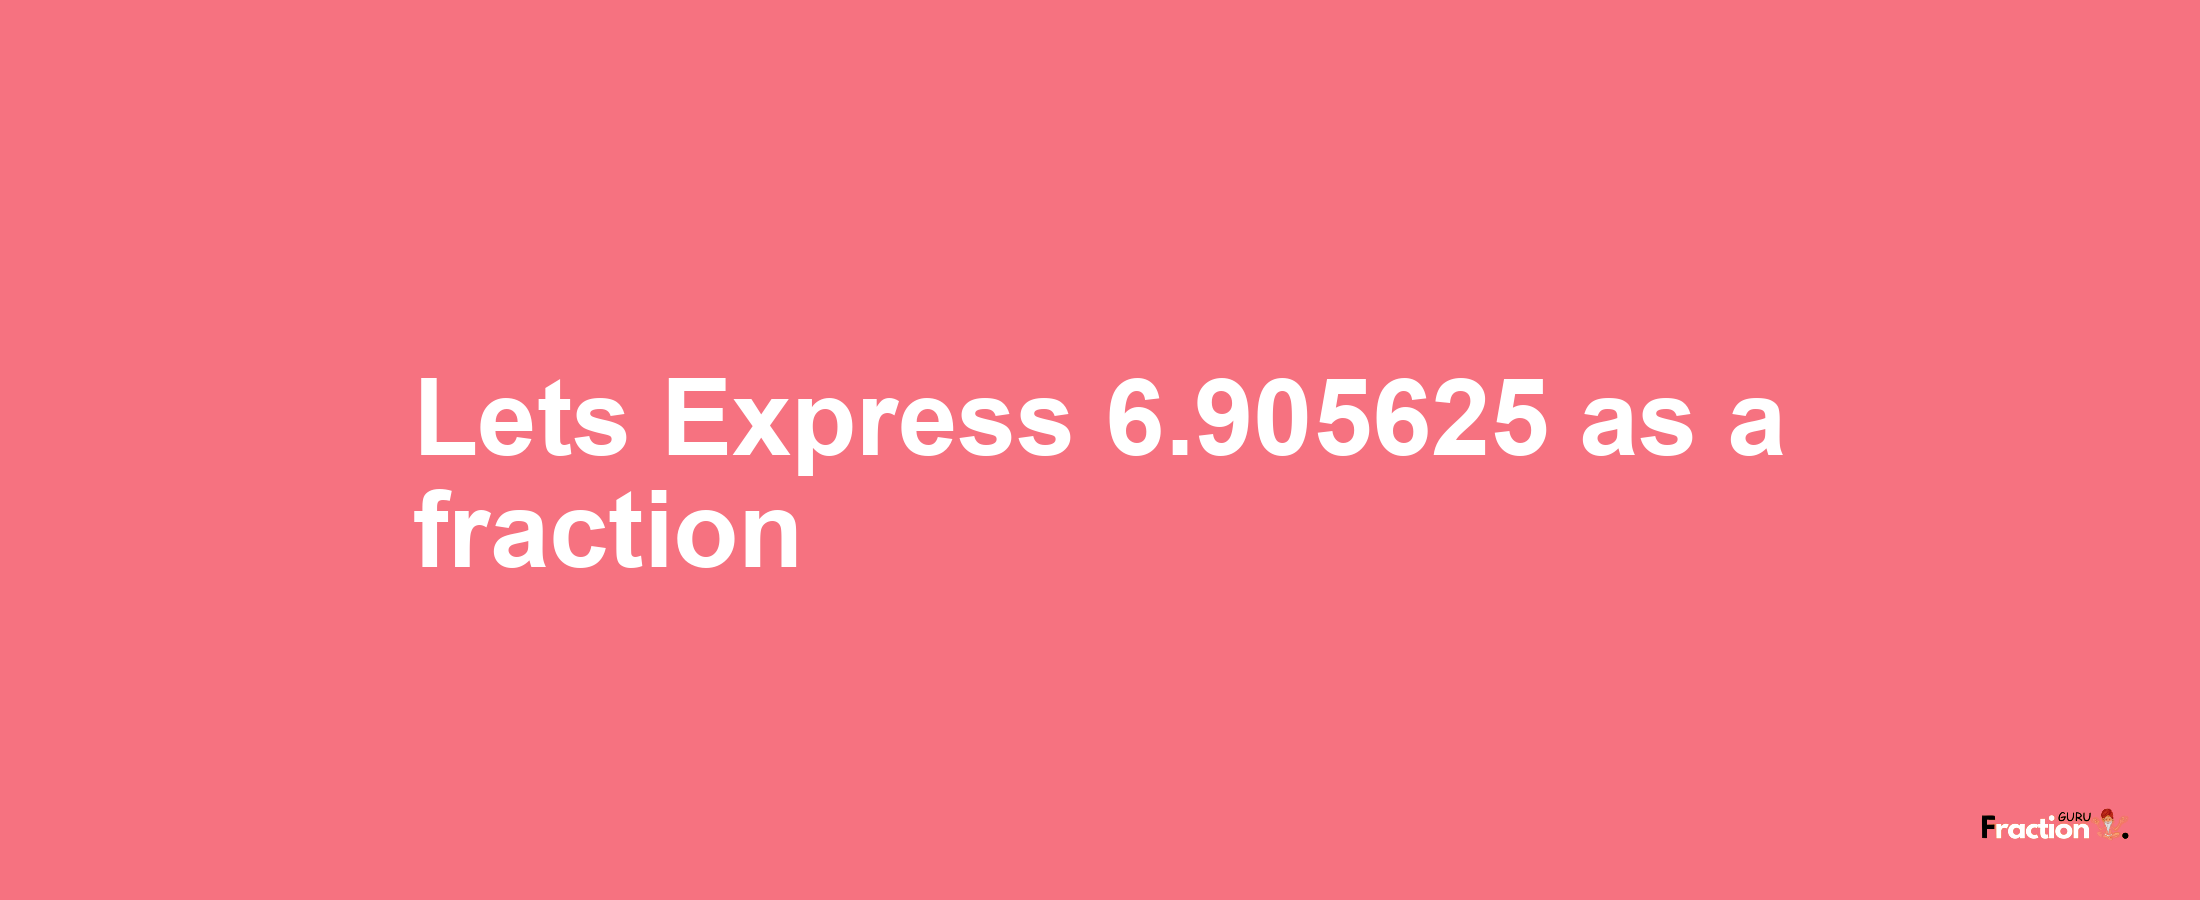 Lets Express 6.905625 as afraction